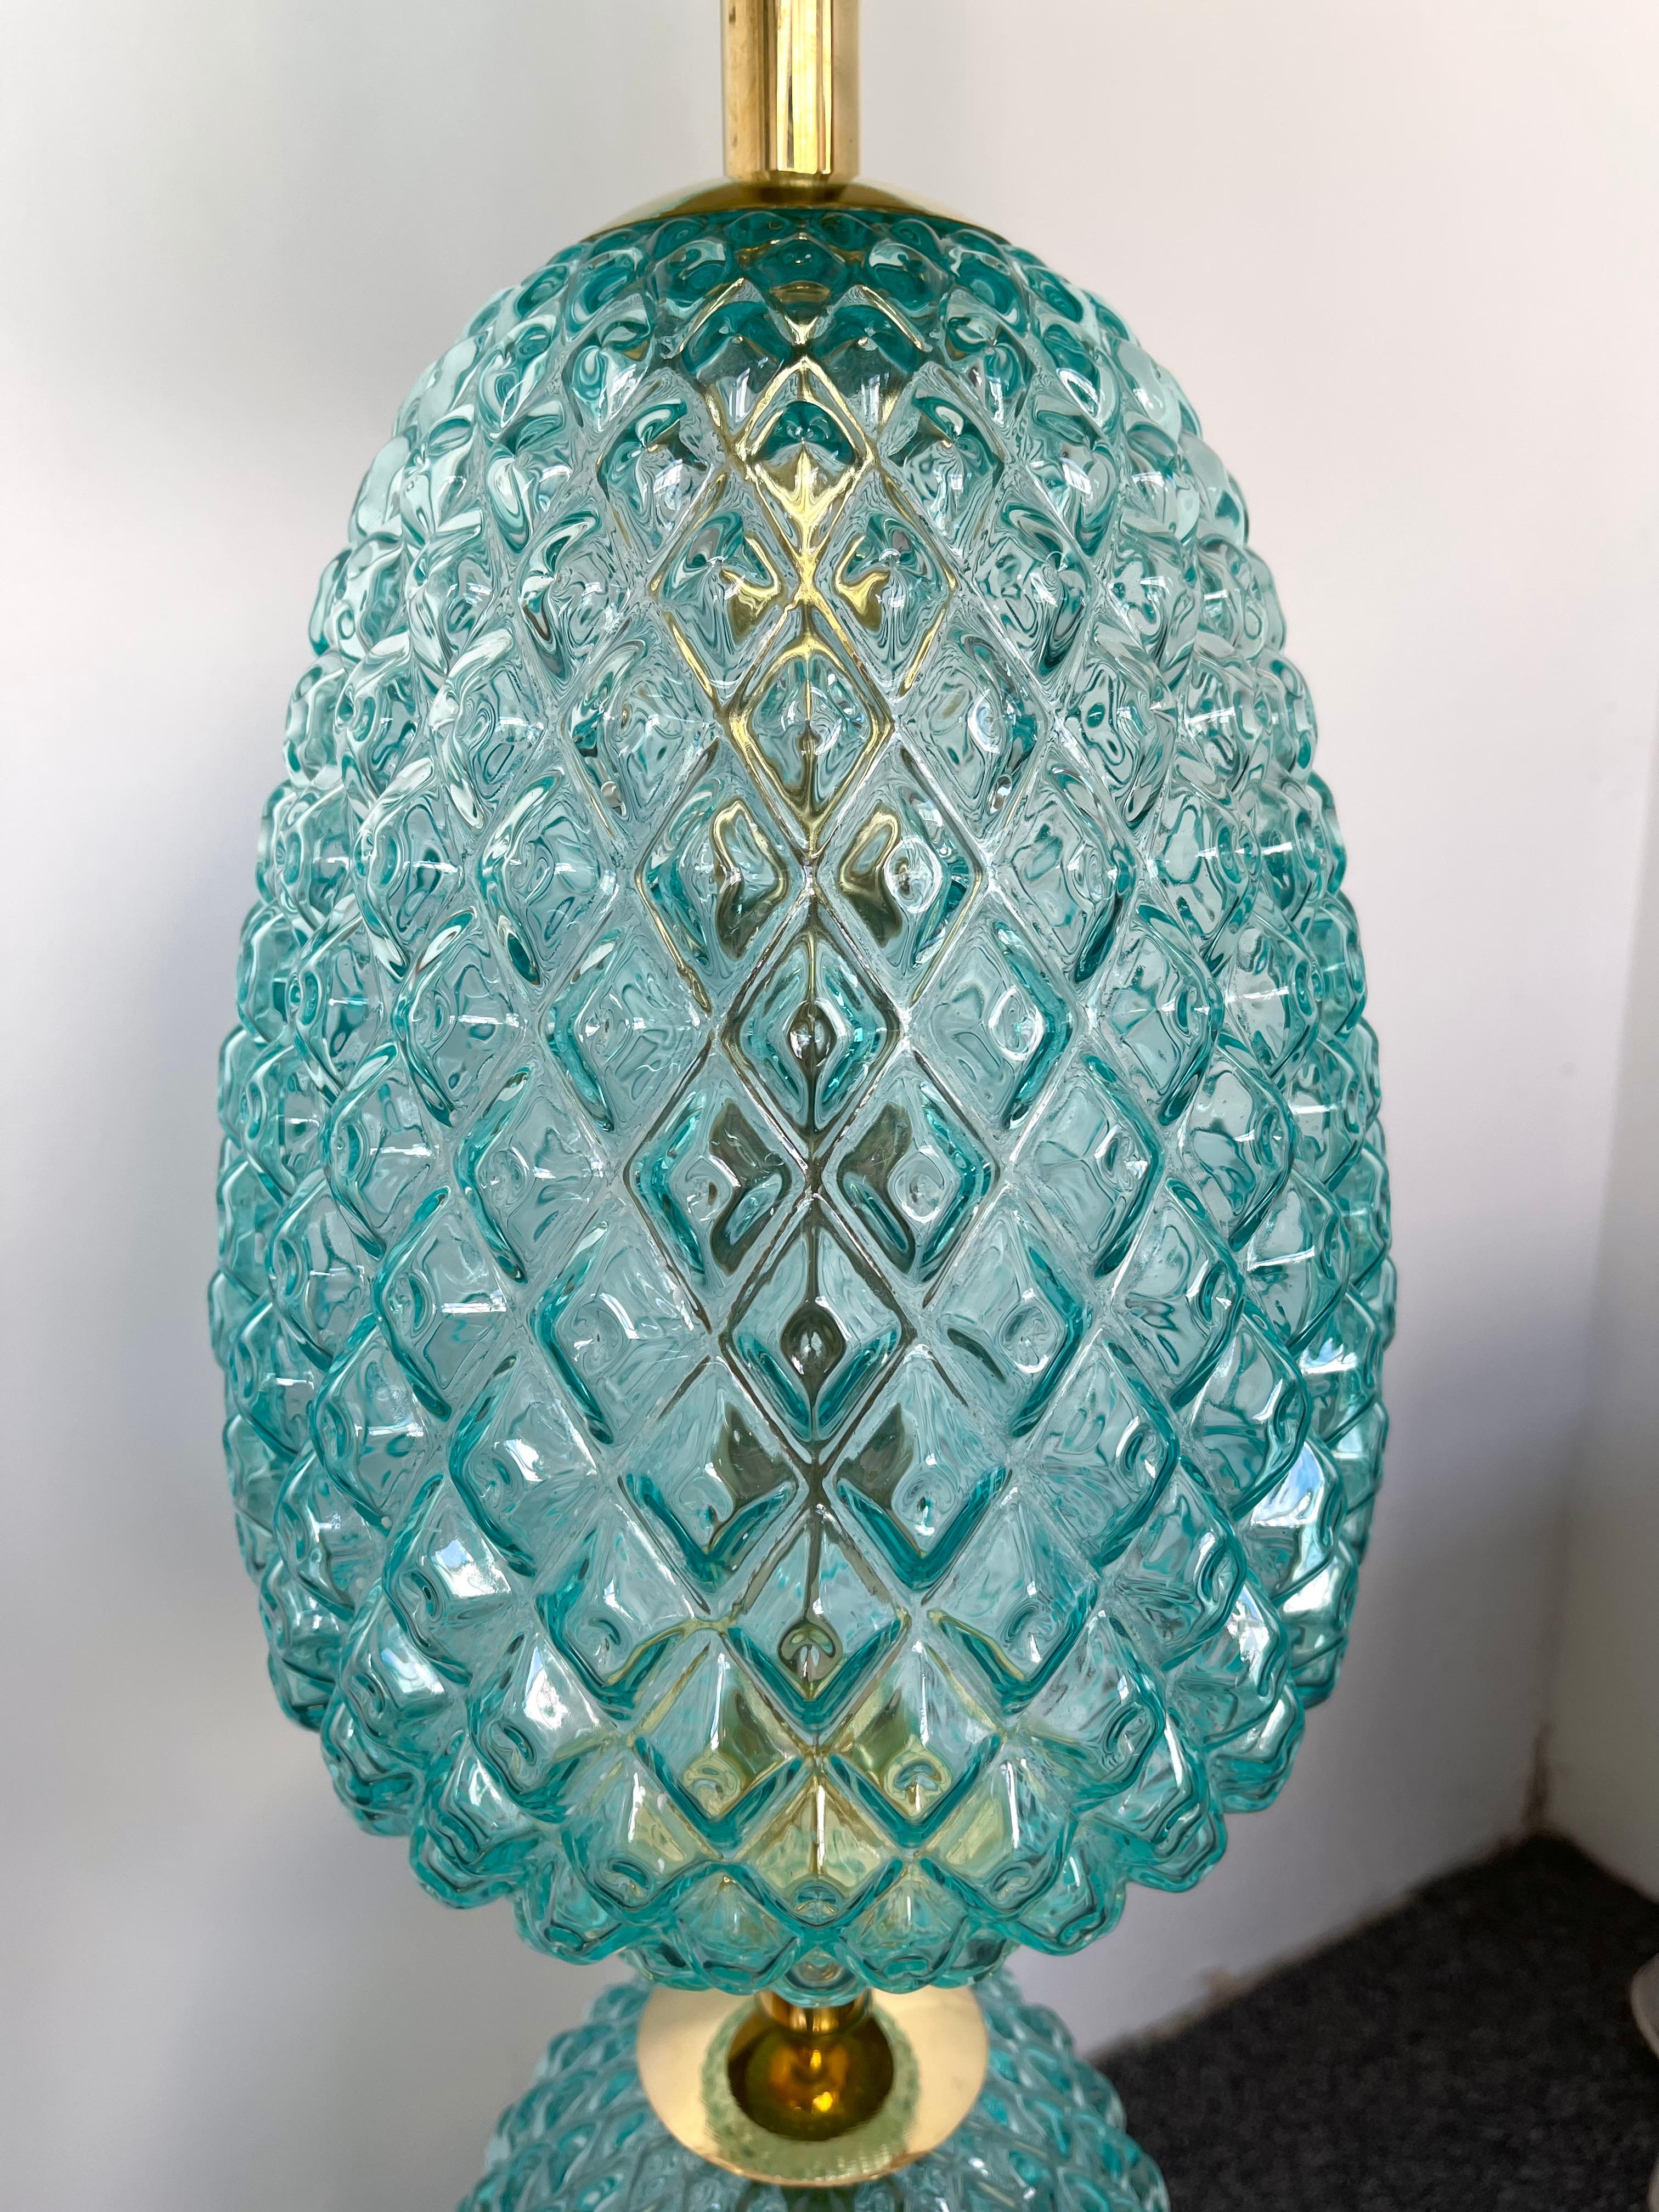 Contemporary Brass Pineapple Murano Glass Floor Lamp, Italy For Sale 2